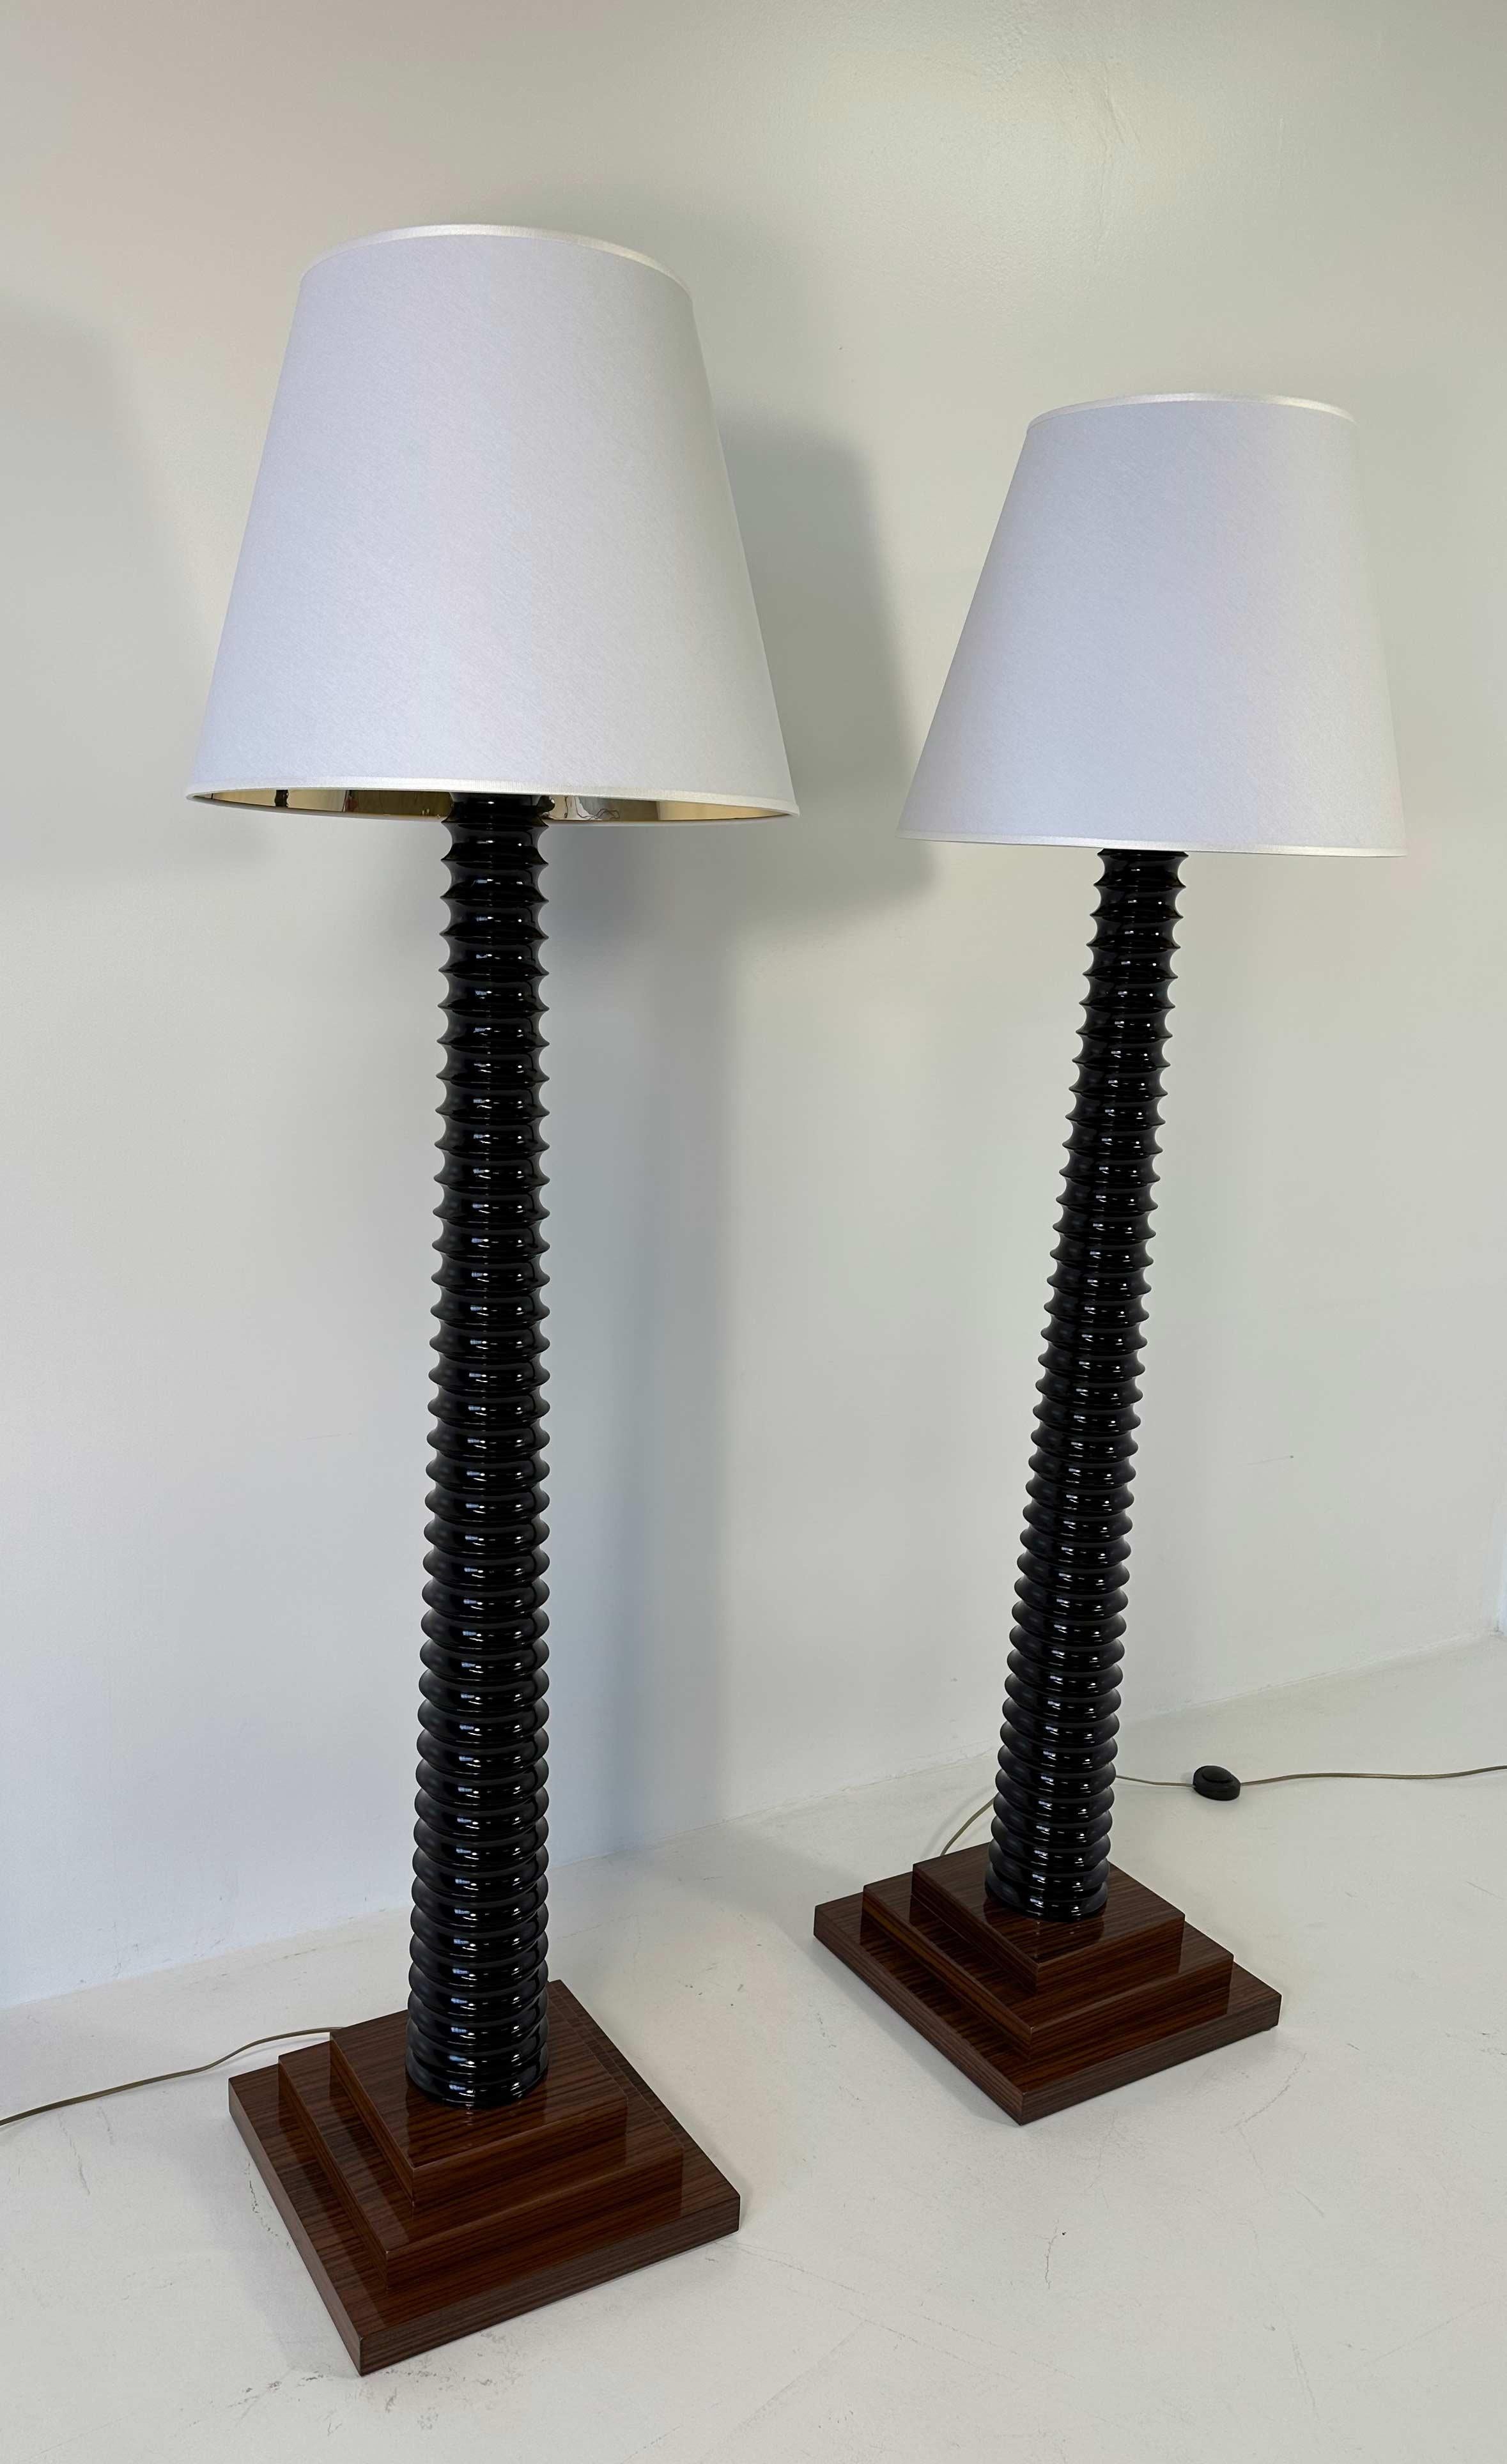 Pair of Italian Art Deco Style Black Lacquered Wood, White and Gold Floor Lamps In Good Condition For Sale In Meda, MB